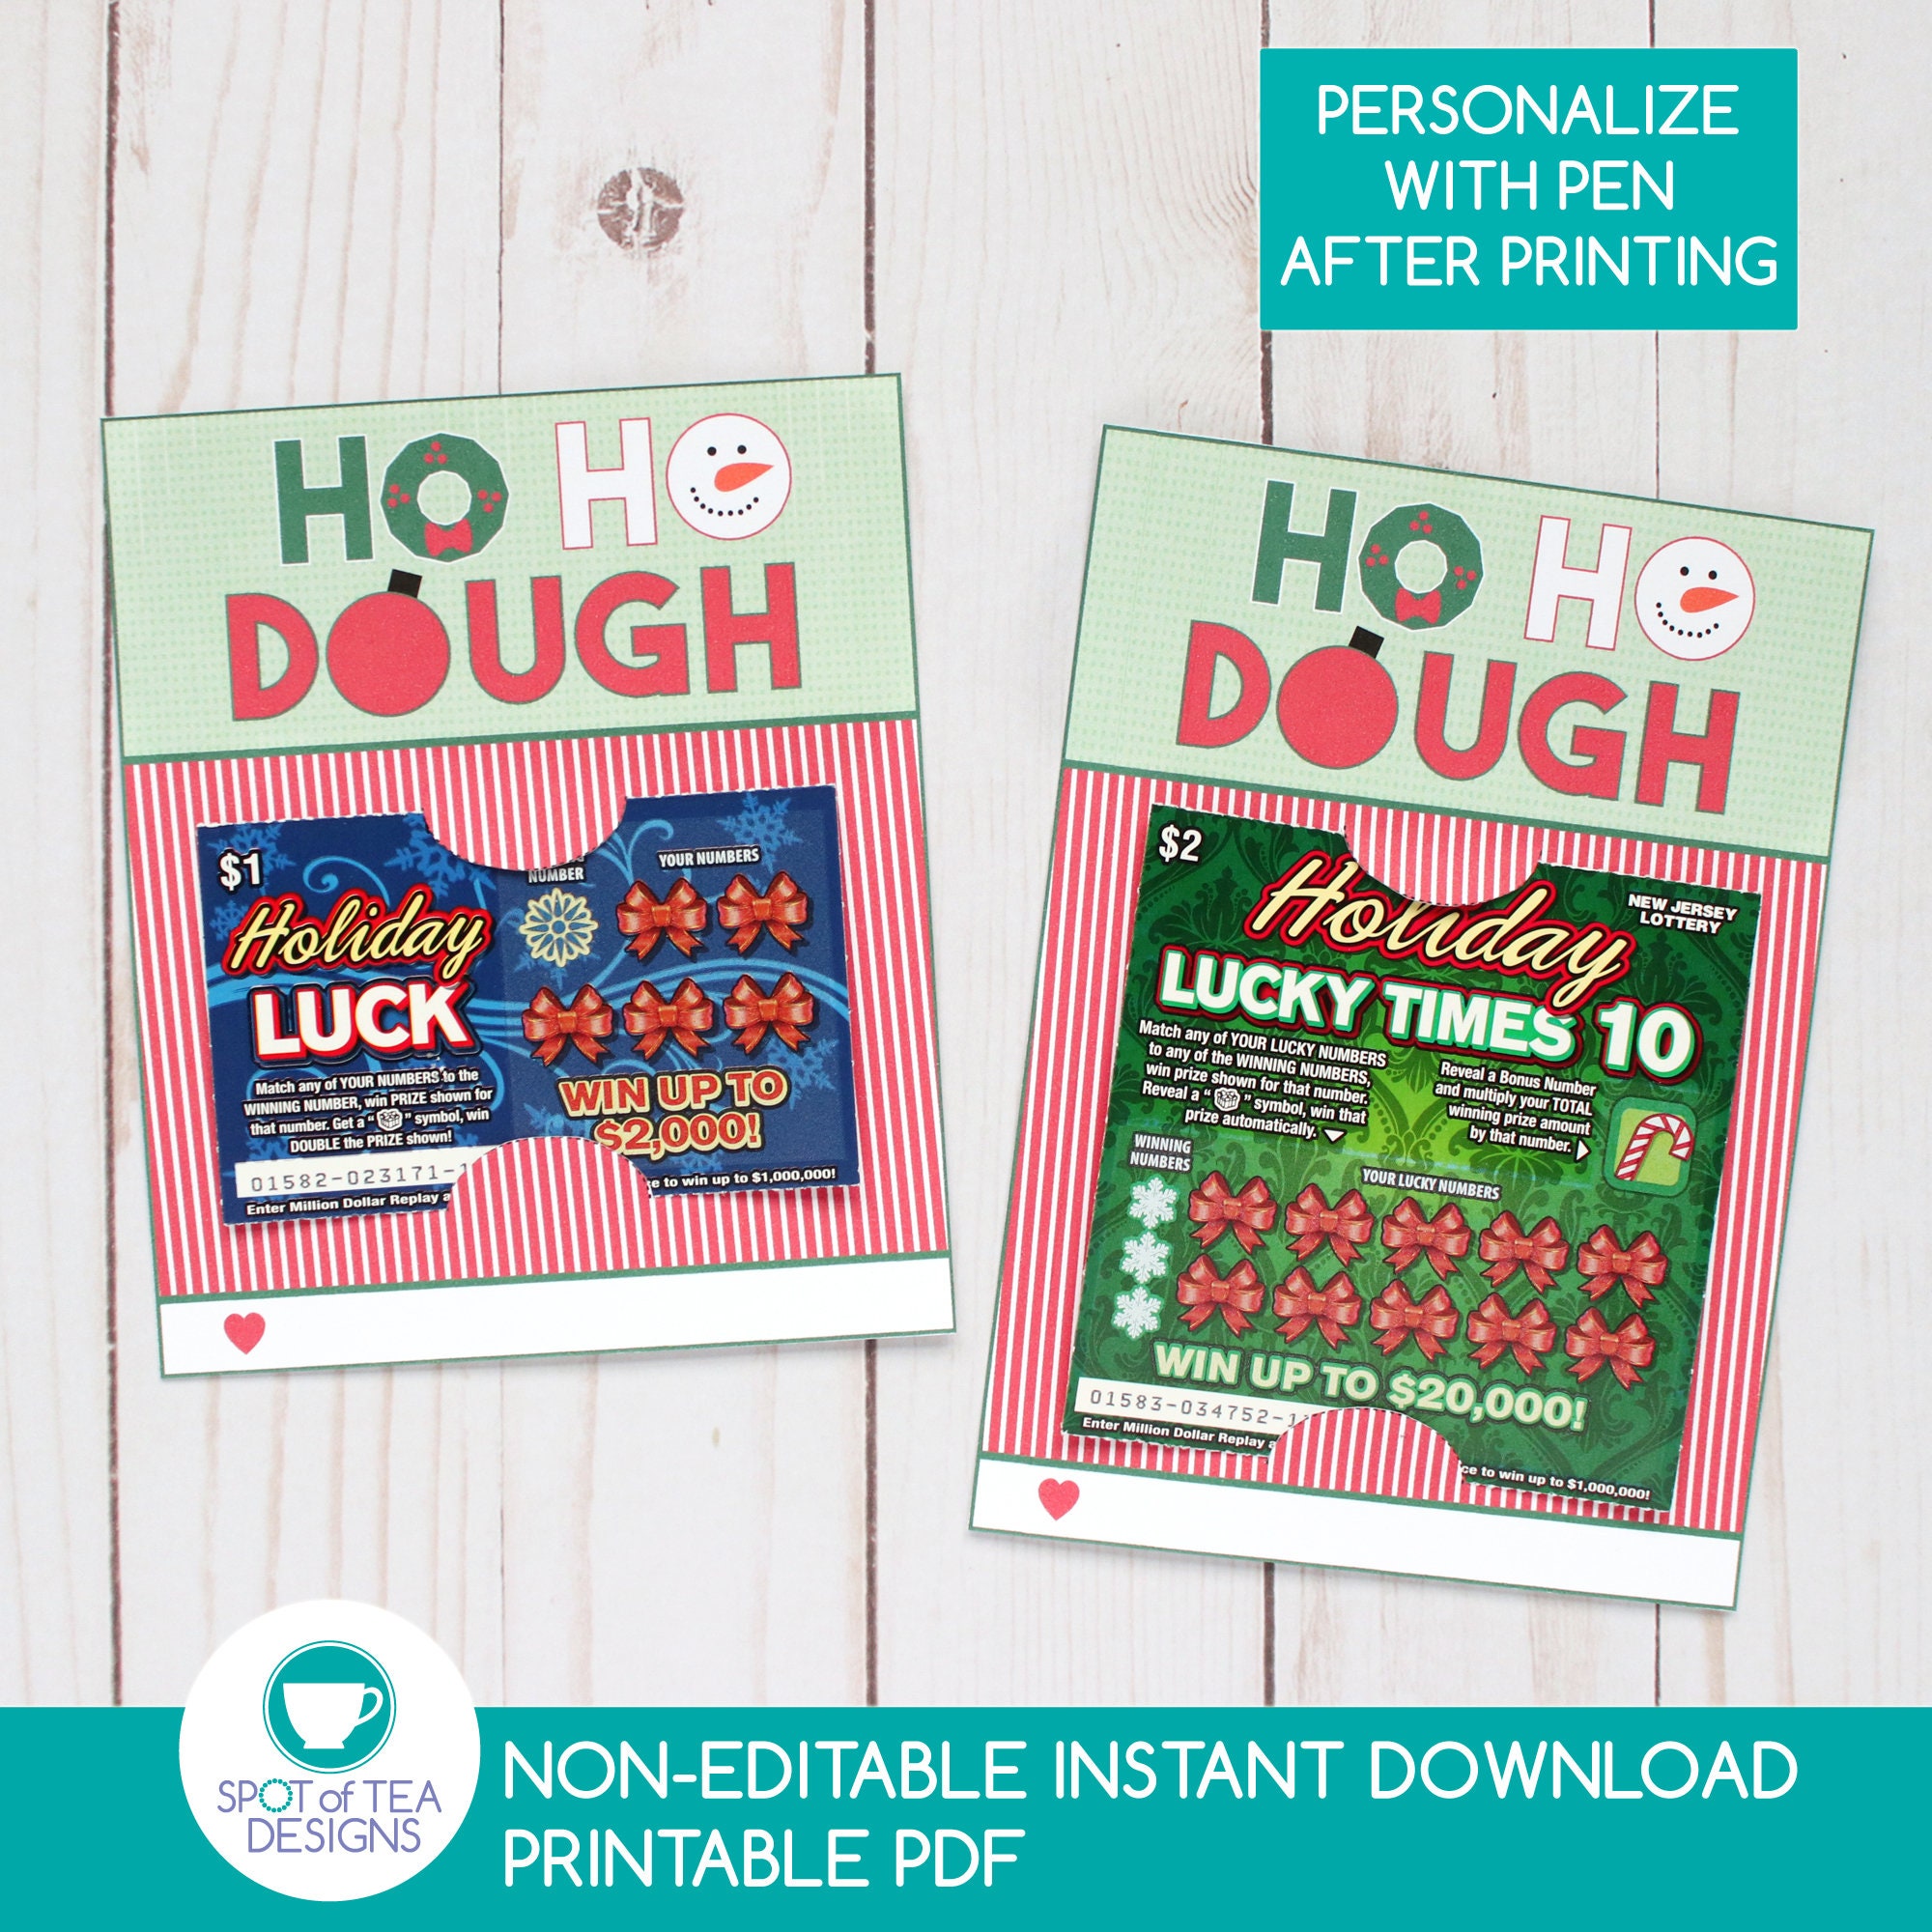 Holiday Lottery Ticket Holder - Instant Download – Stockberry Studio